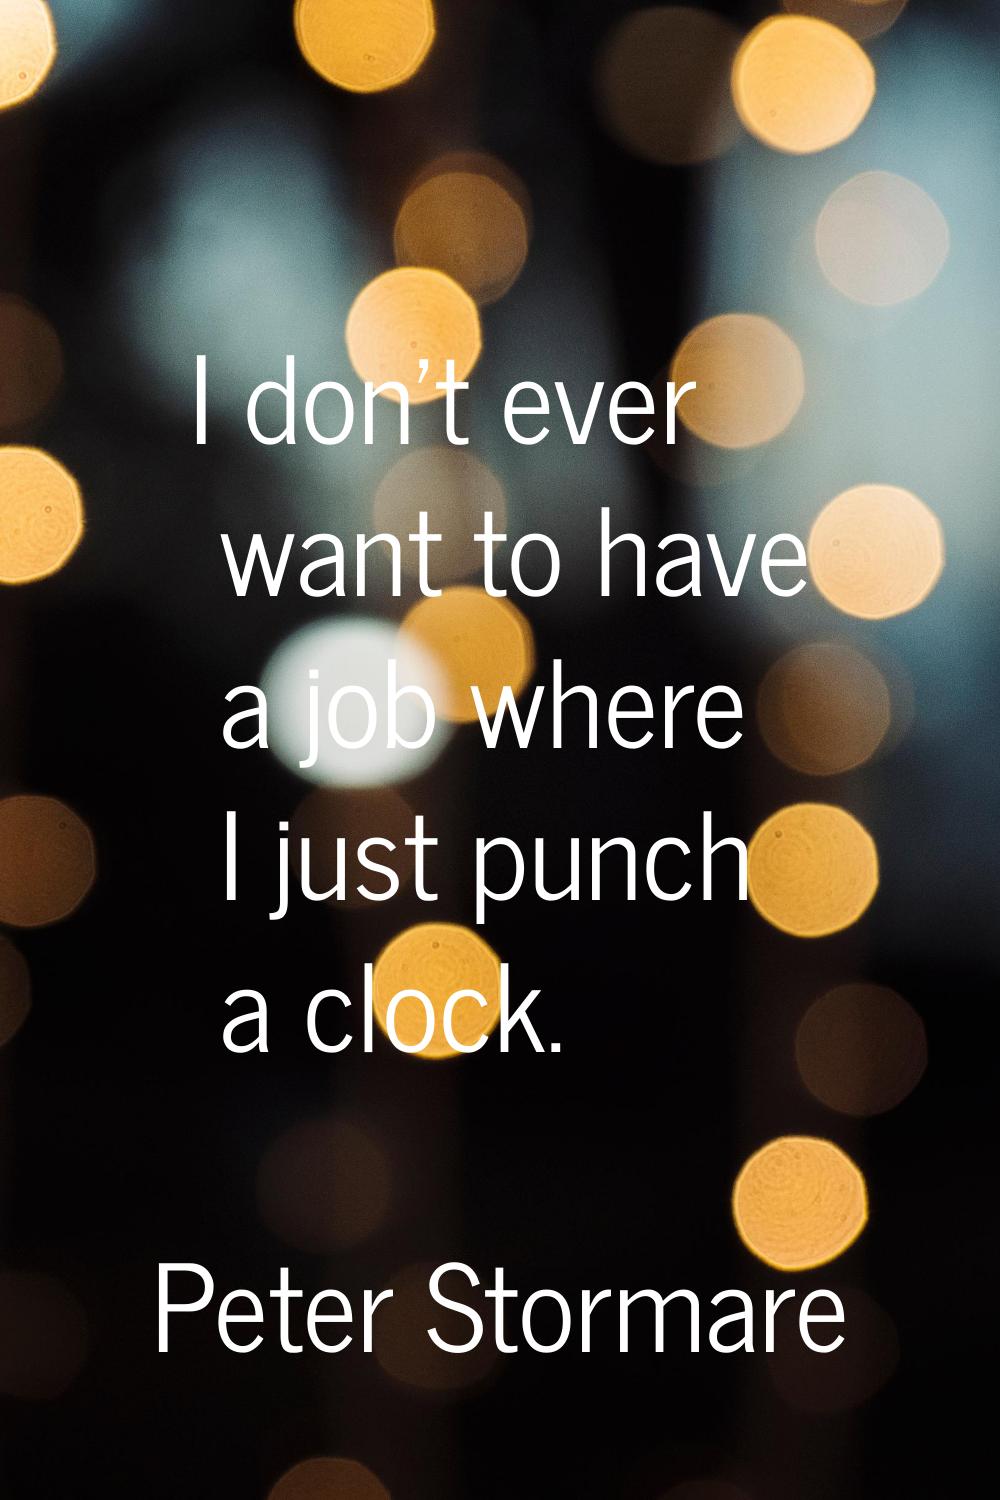 I don't ever want to have a job where I just punch a clock.